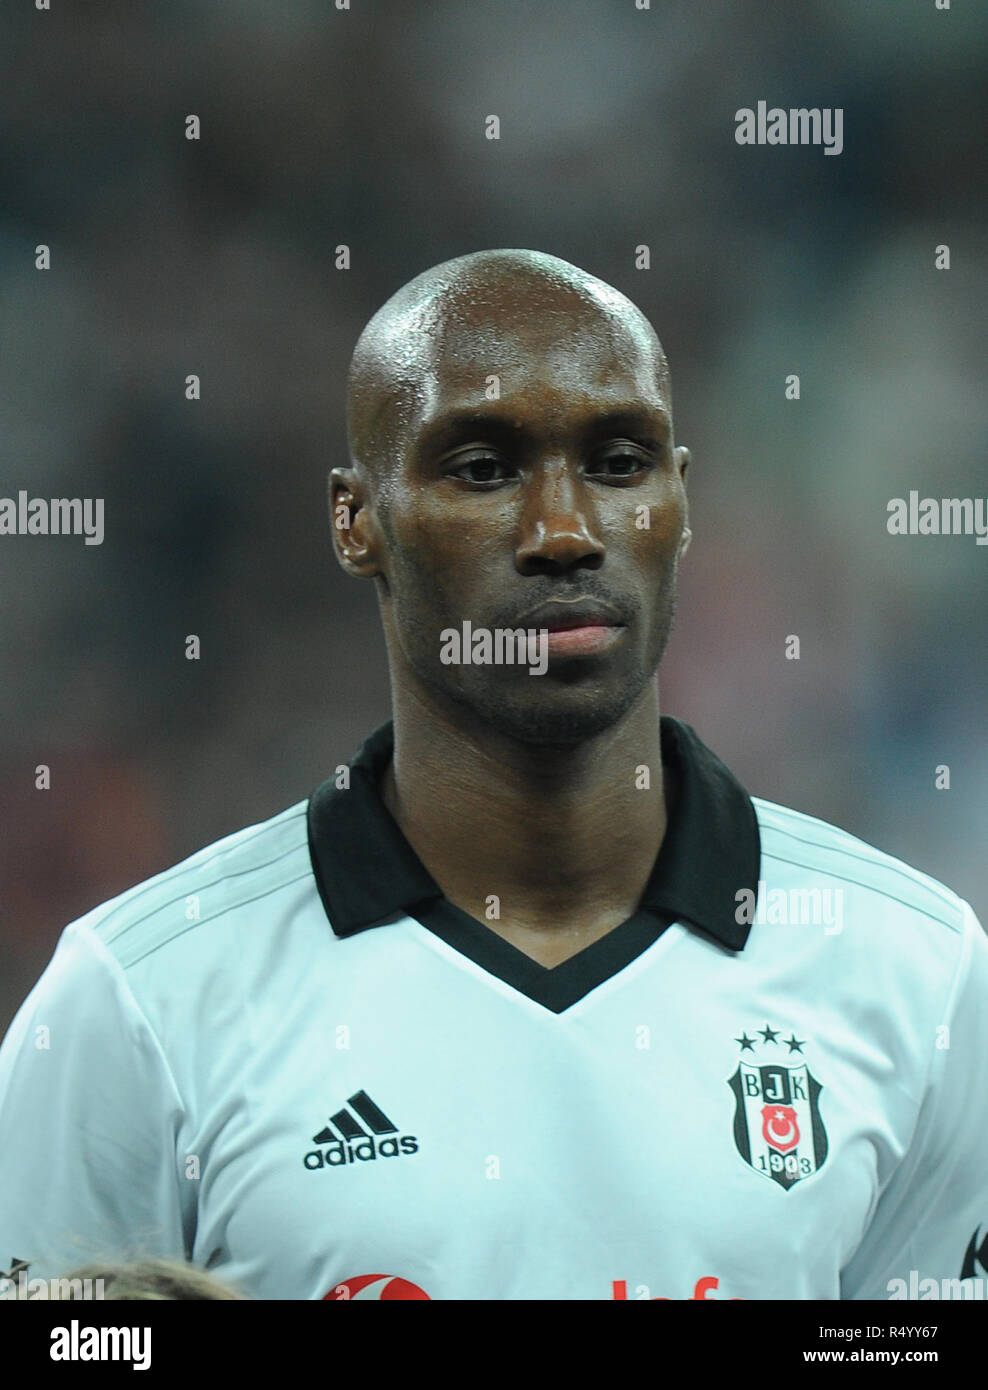 Atiba hutchinson in action during hi-res stock photography and